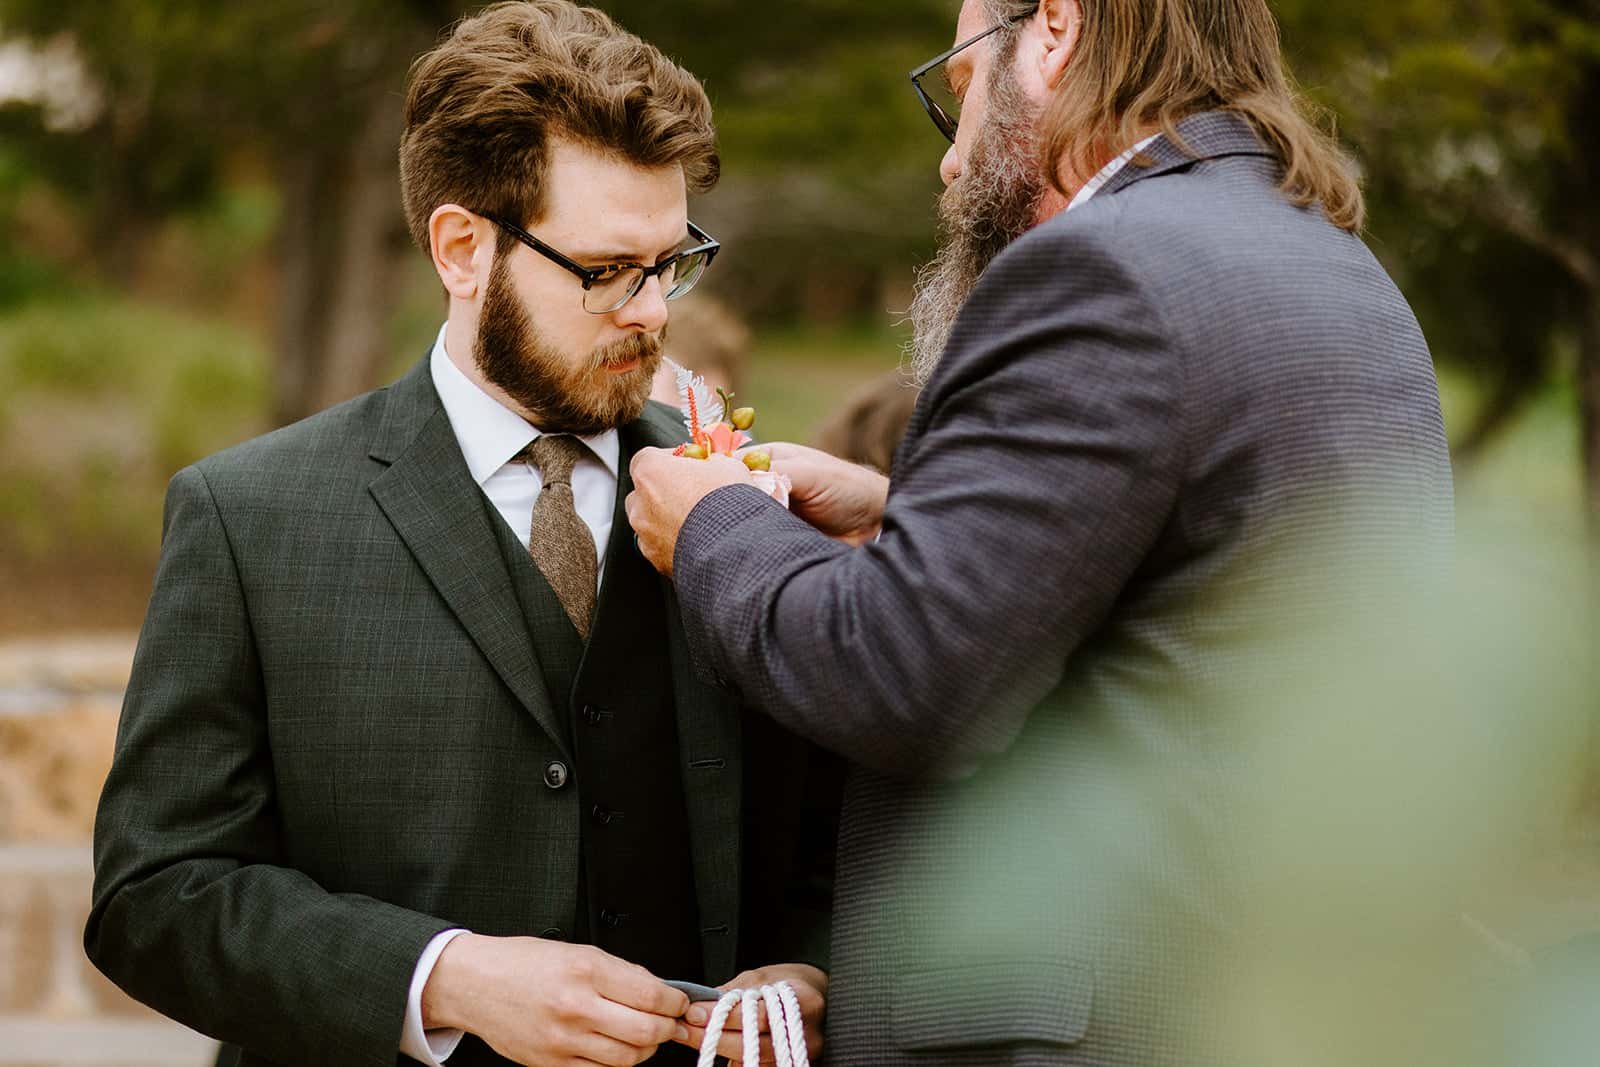 A man helps put a boutonniere on a suit jacket